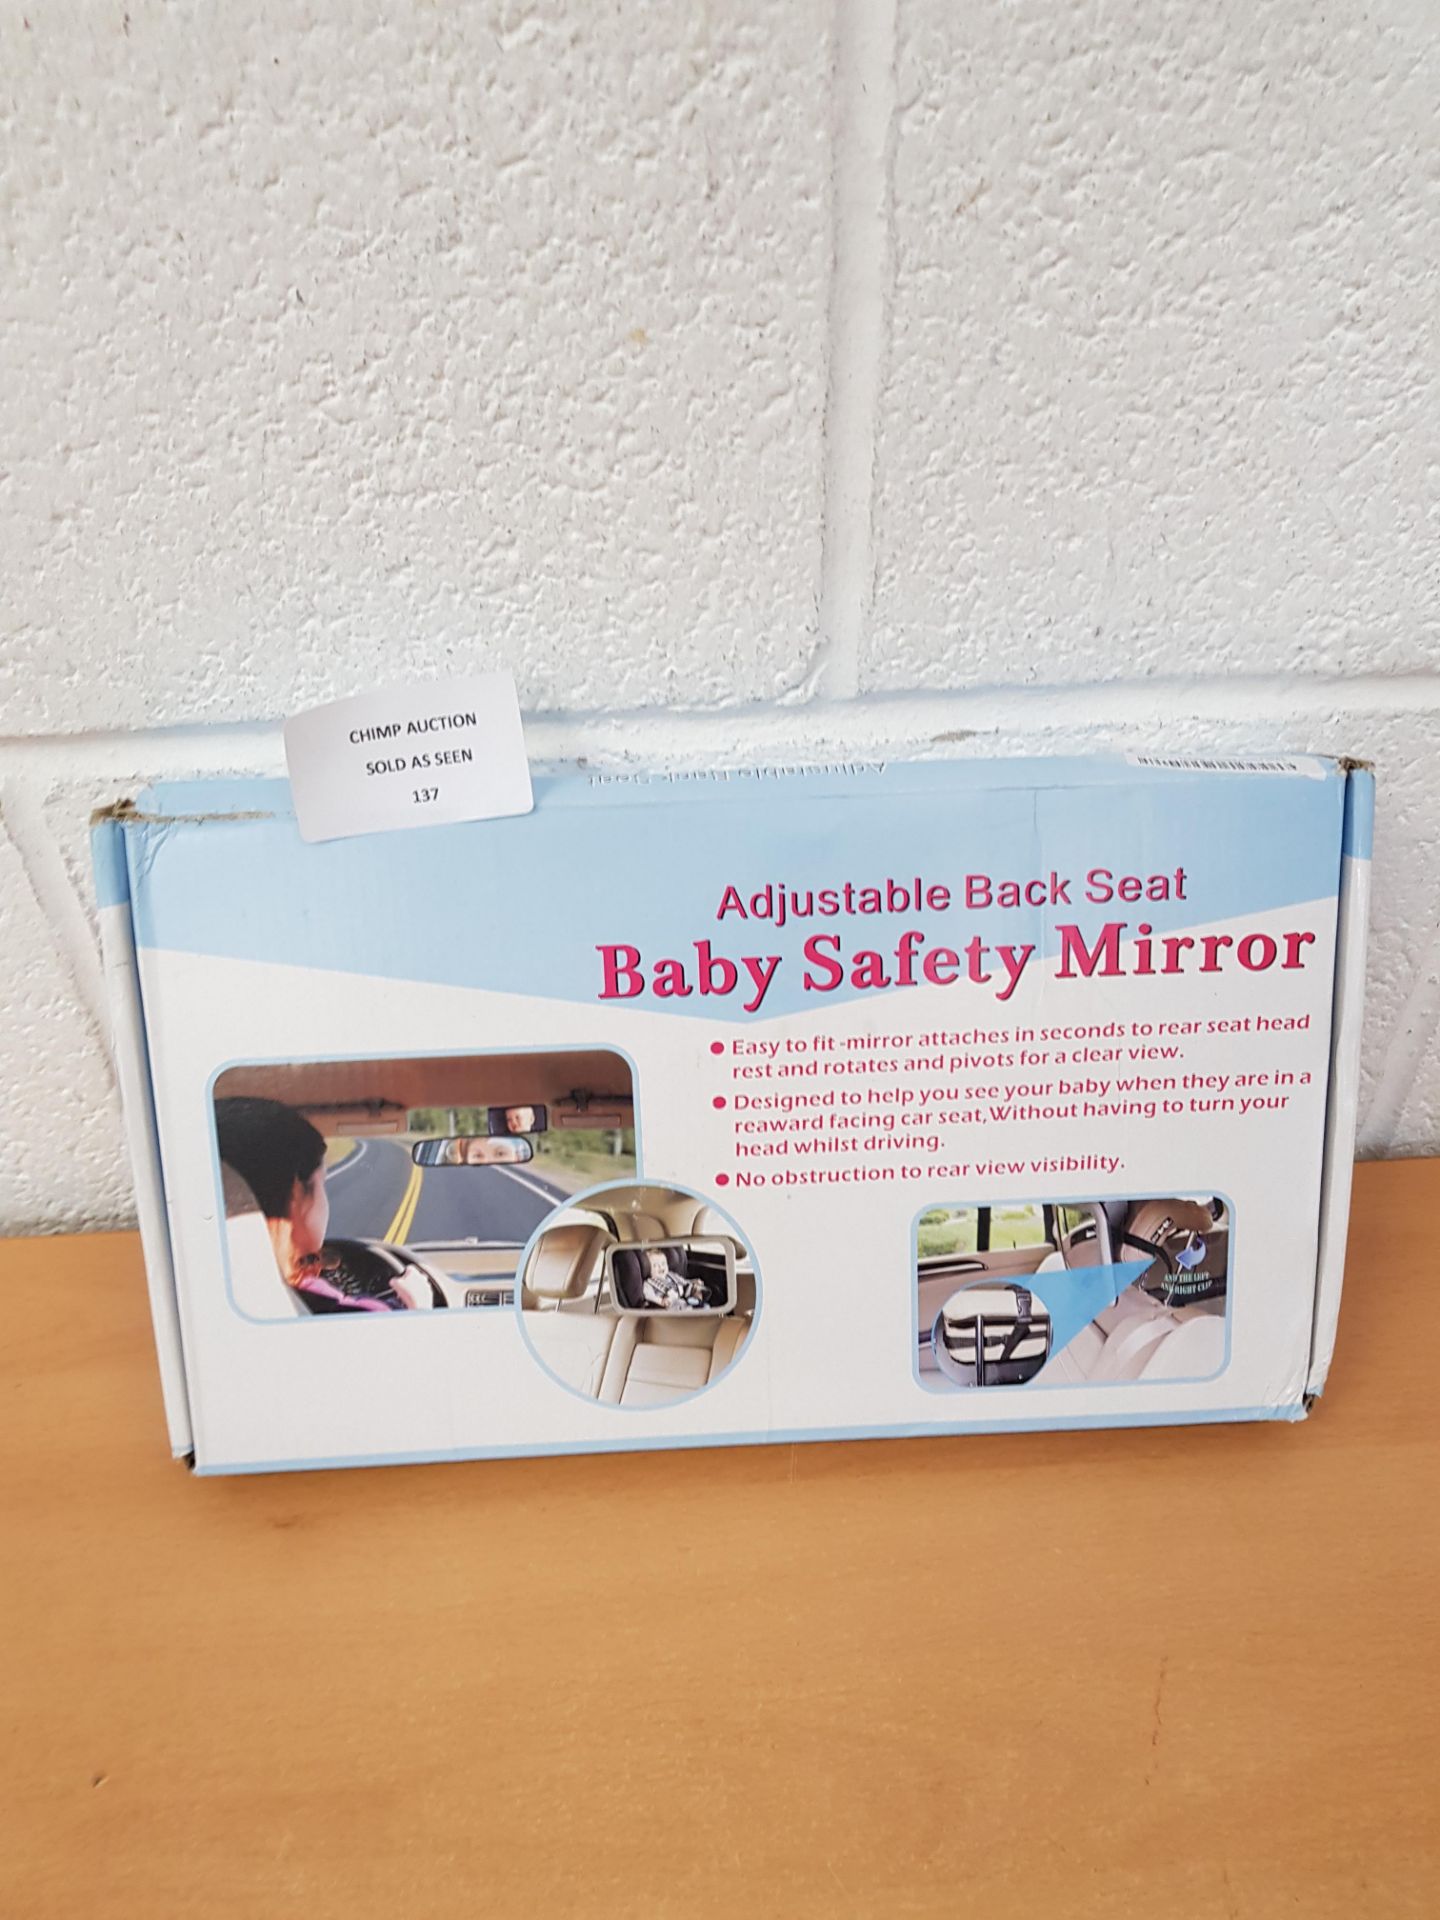 Adjustable Back Seat Baby Safety Mirror